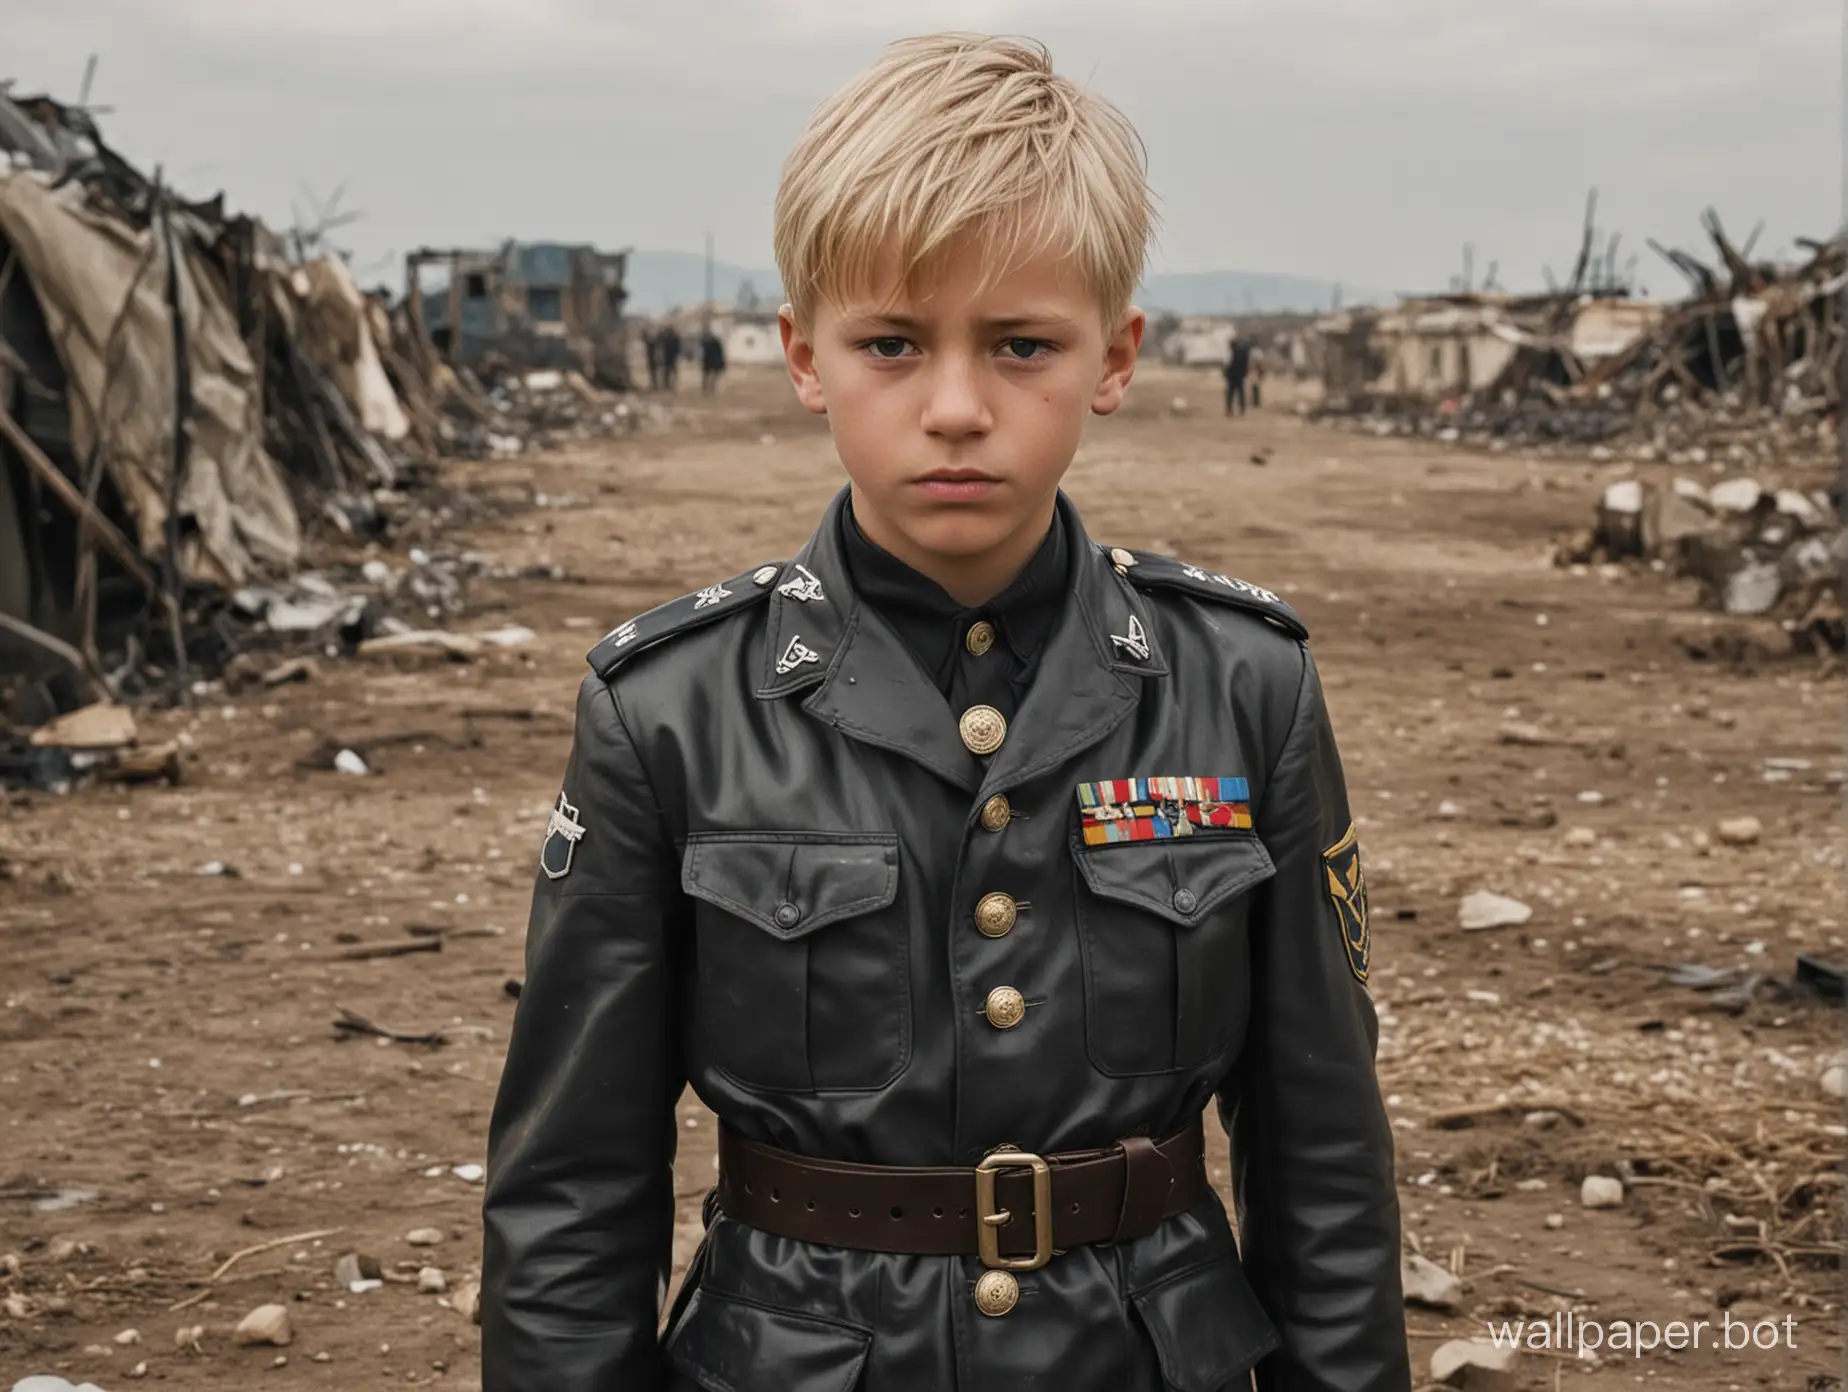 wo young boys, one blond and the other with black hair, both clad in a uniform made of latex with leather straps. They are standing in a makeshift camp in a field, with the backdrop of a war-torn landscape. The blond boy, who appears to be the younger of the two, is dressed in a prisoner of war uniform, while the black-haired boy is wearing a uniform similar to his own but with additional rank insignia. They are embracing each other tenderly, their eyes closed, oblivious to the chaos around them. The blond boy's cheeks are flushed, and there are tears streaming down his face, while the black-haired boy's expression is one of comfort and protection. The uniforms of both boys are dirty and worn, a testament to their hardship and suffering during the war. In the distance, one can see the remains of destroyed buildings and vehicles, further emphasizing the devastation they have endured.